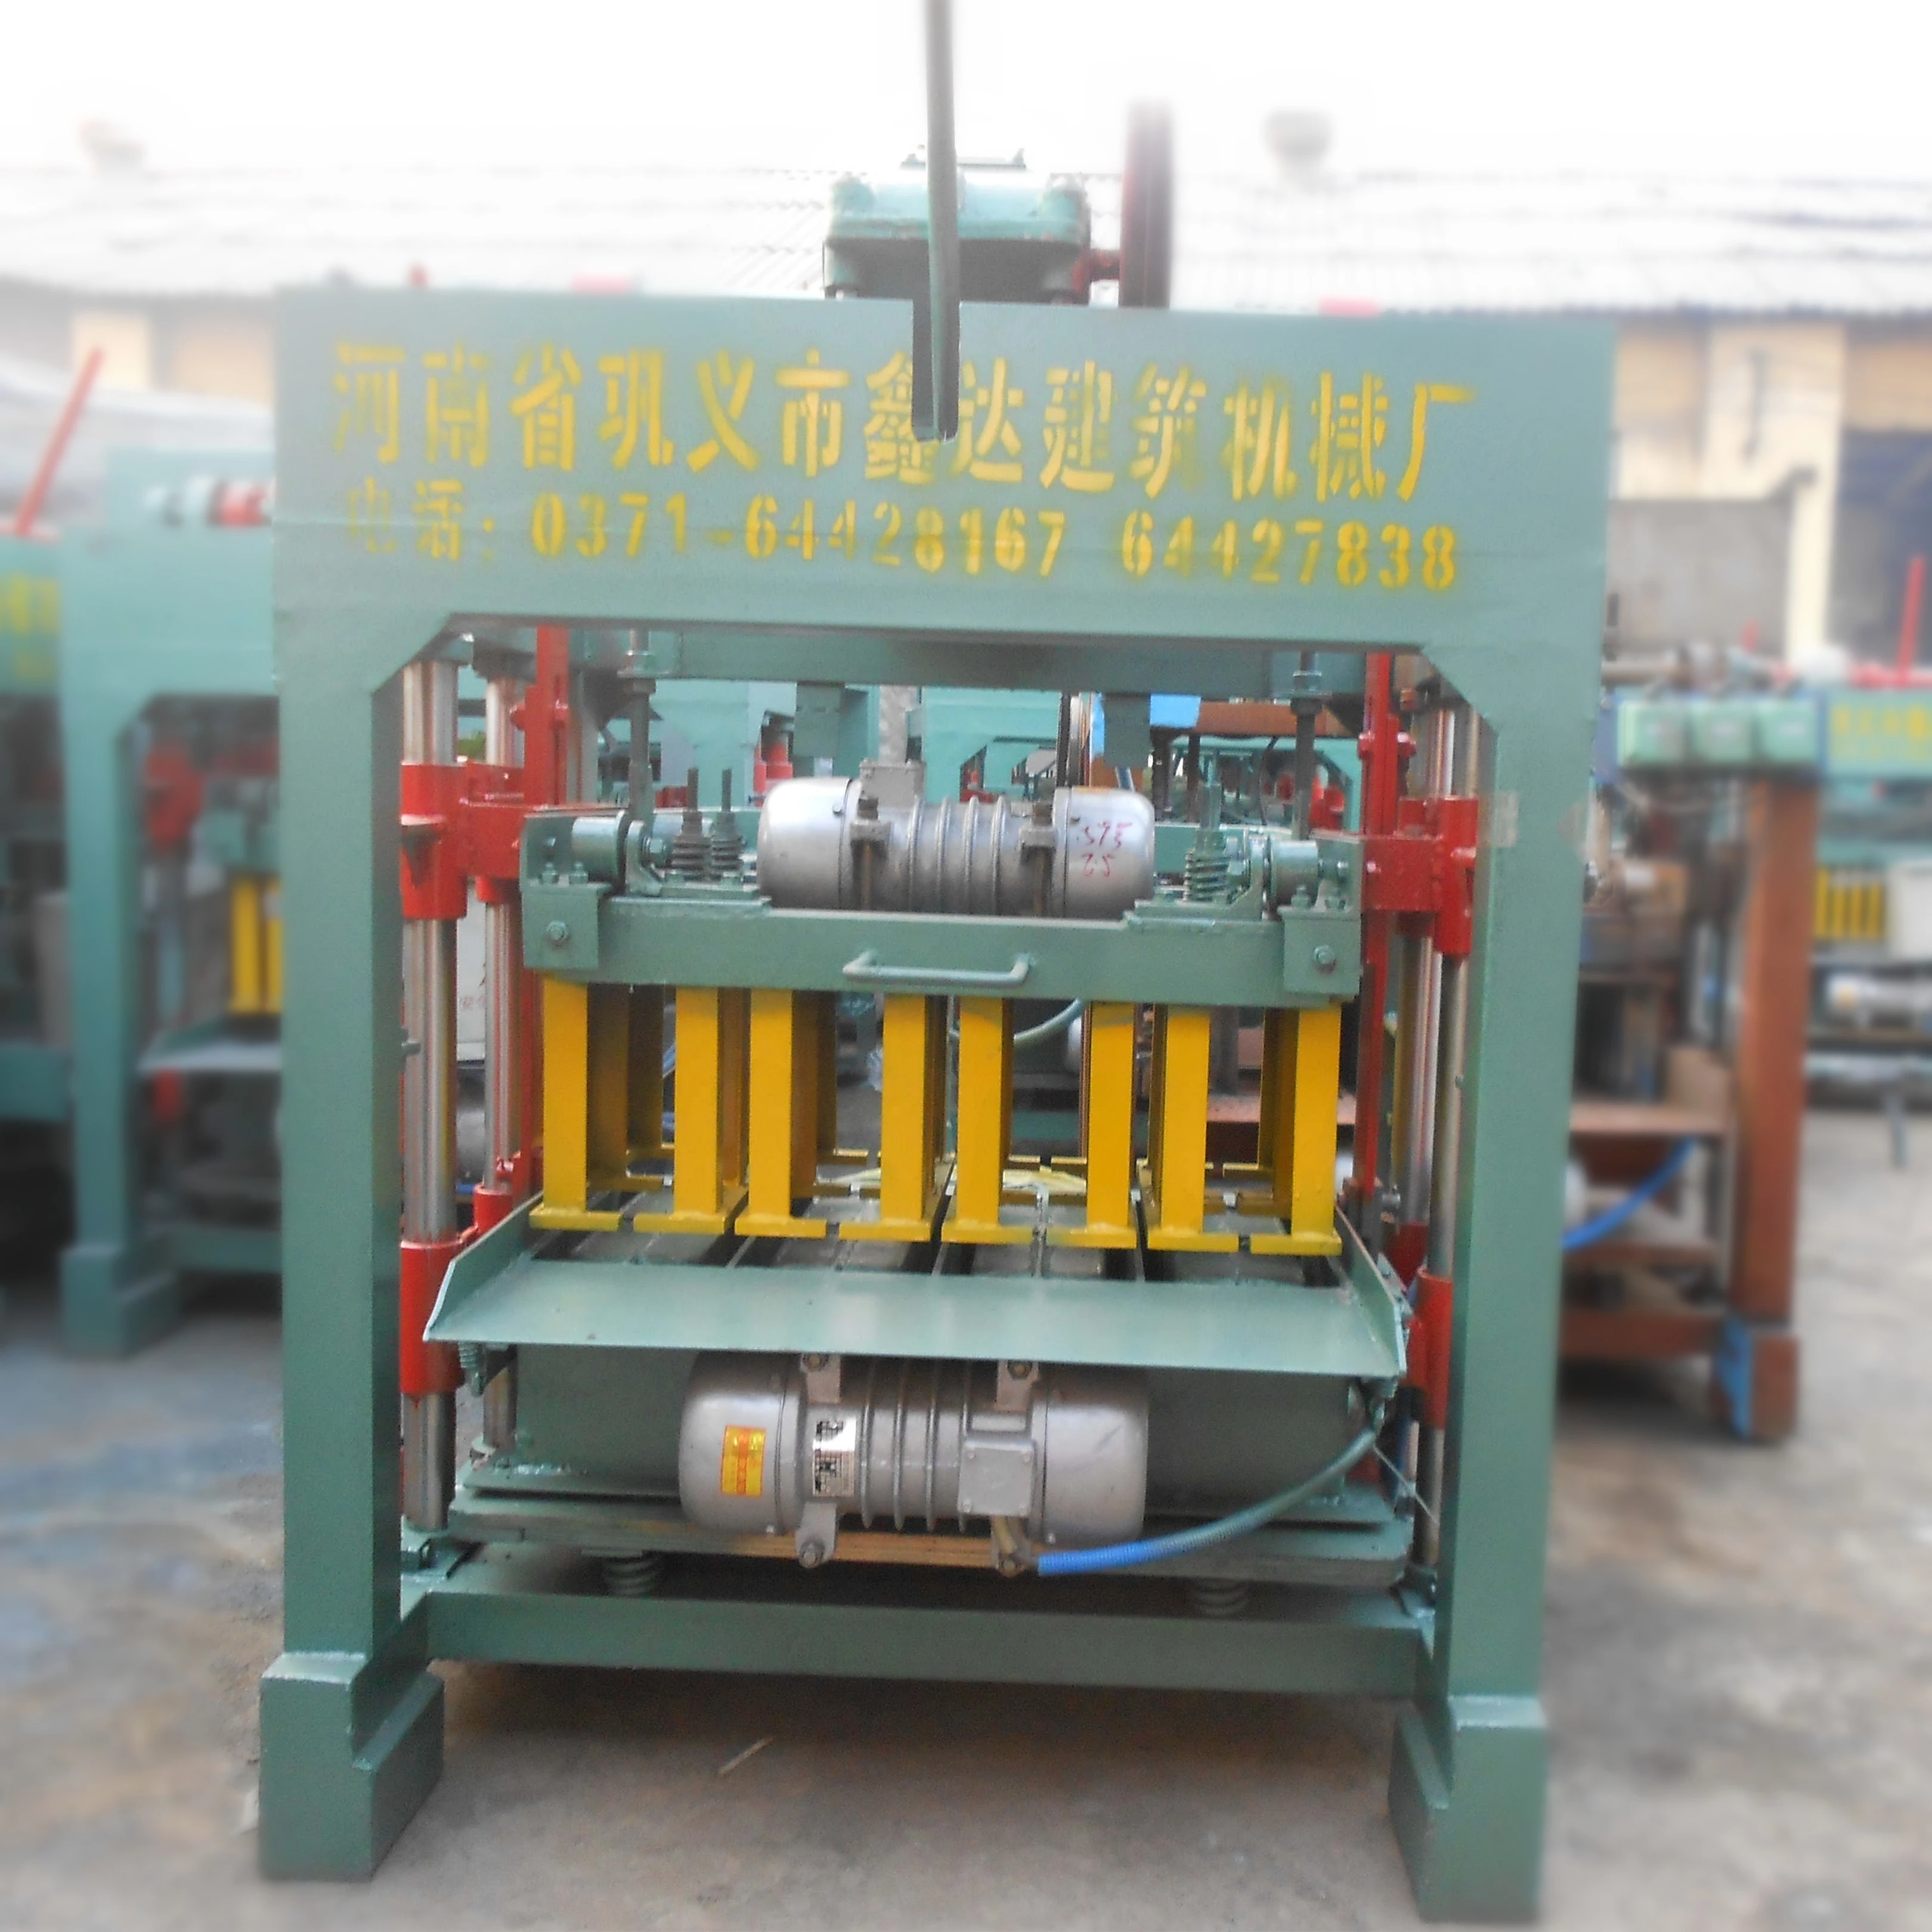 hollow fly ash cement brick making machine price in malaysia